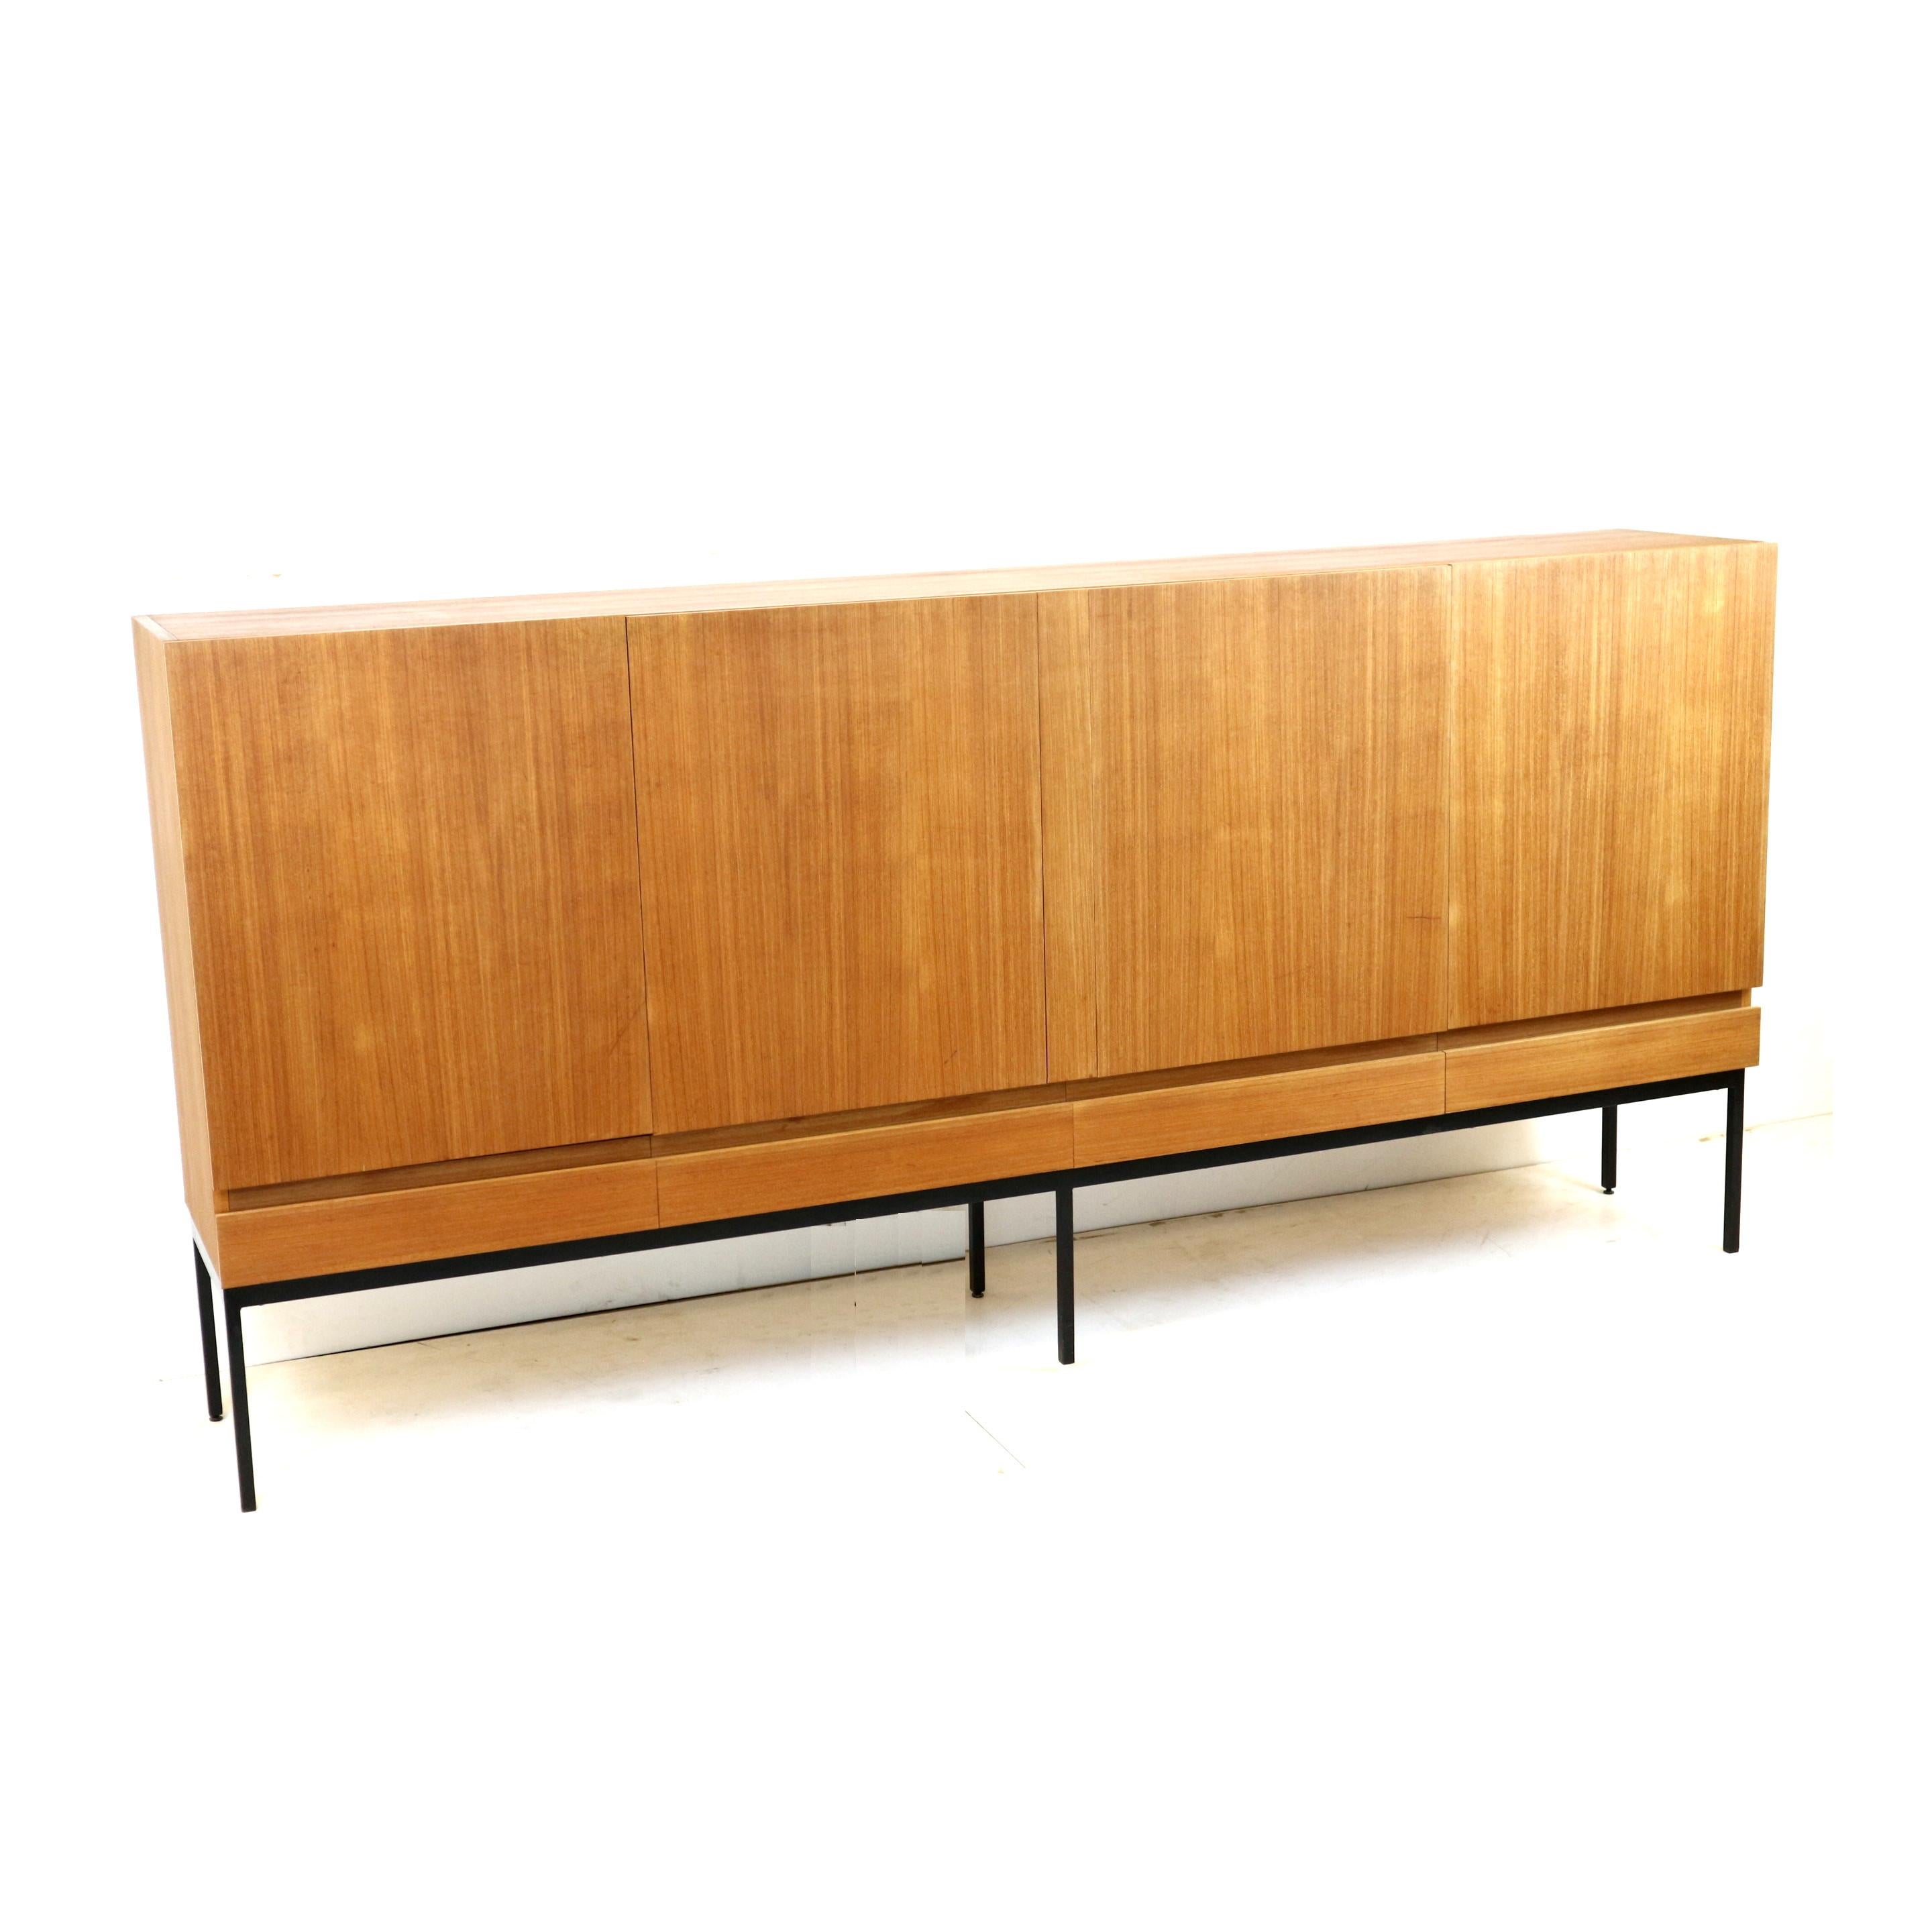 Mid-20th Century Vintage sideboard / highboard Dieter Waeckerlin B60 for Behr from the 1960s For Sale